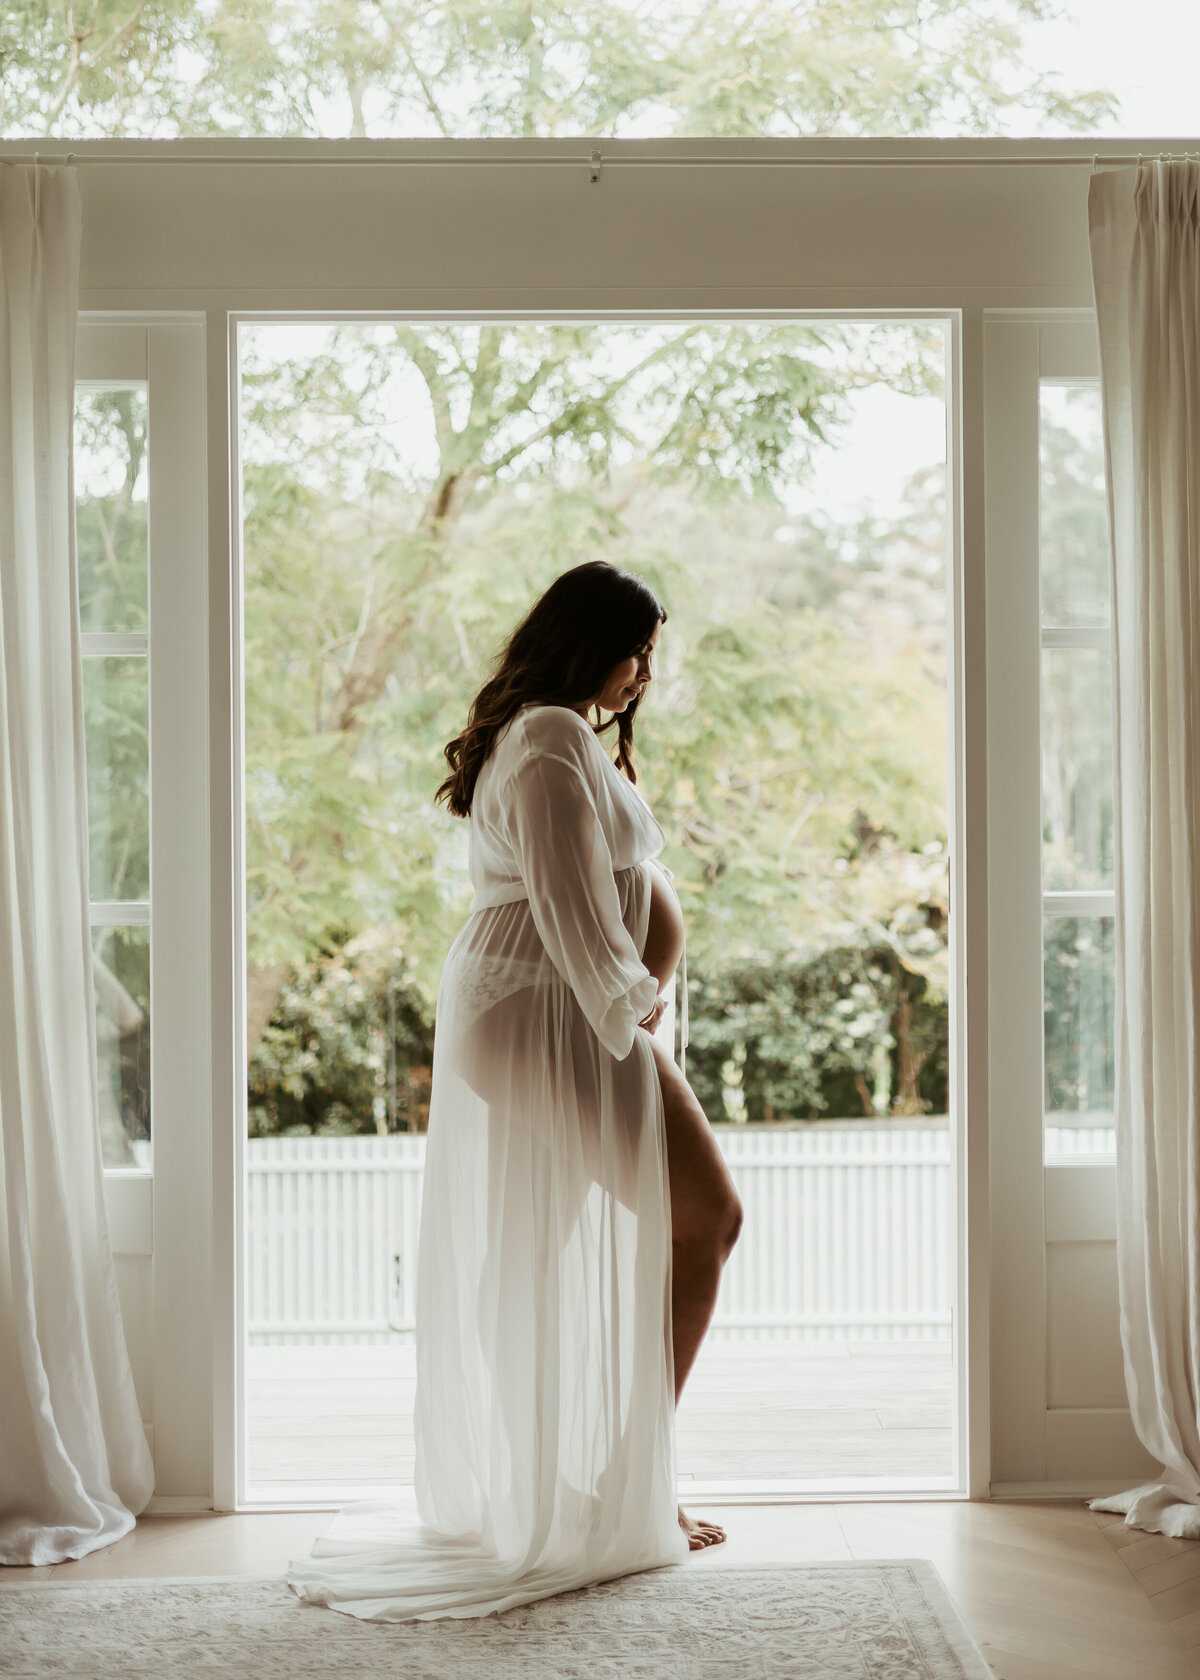 Pregnant woman in see-through white robe posing in doorway of opened French white doors